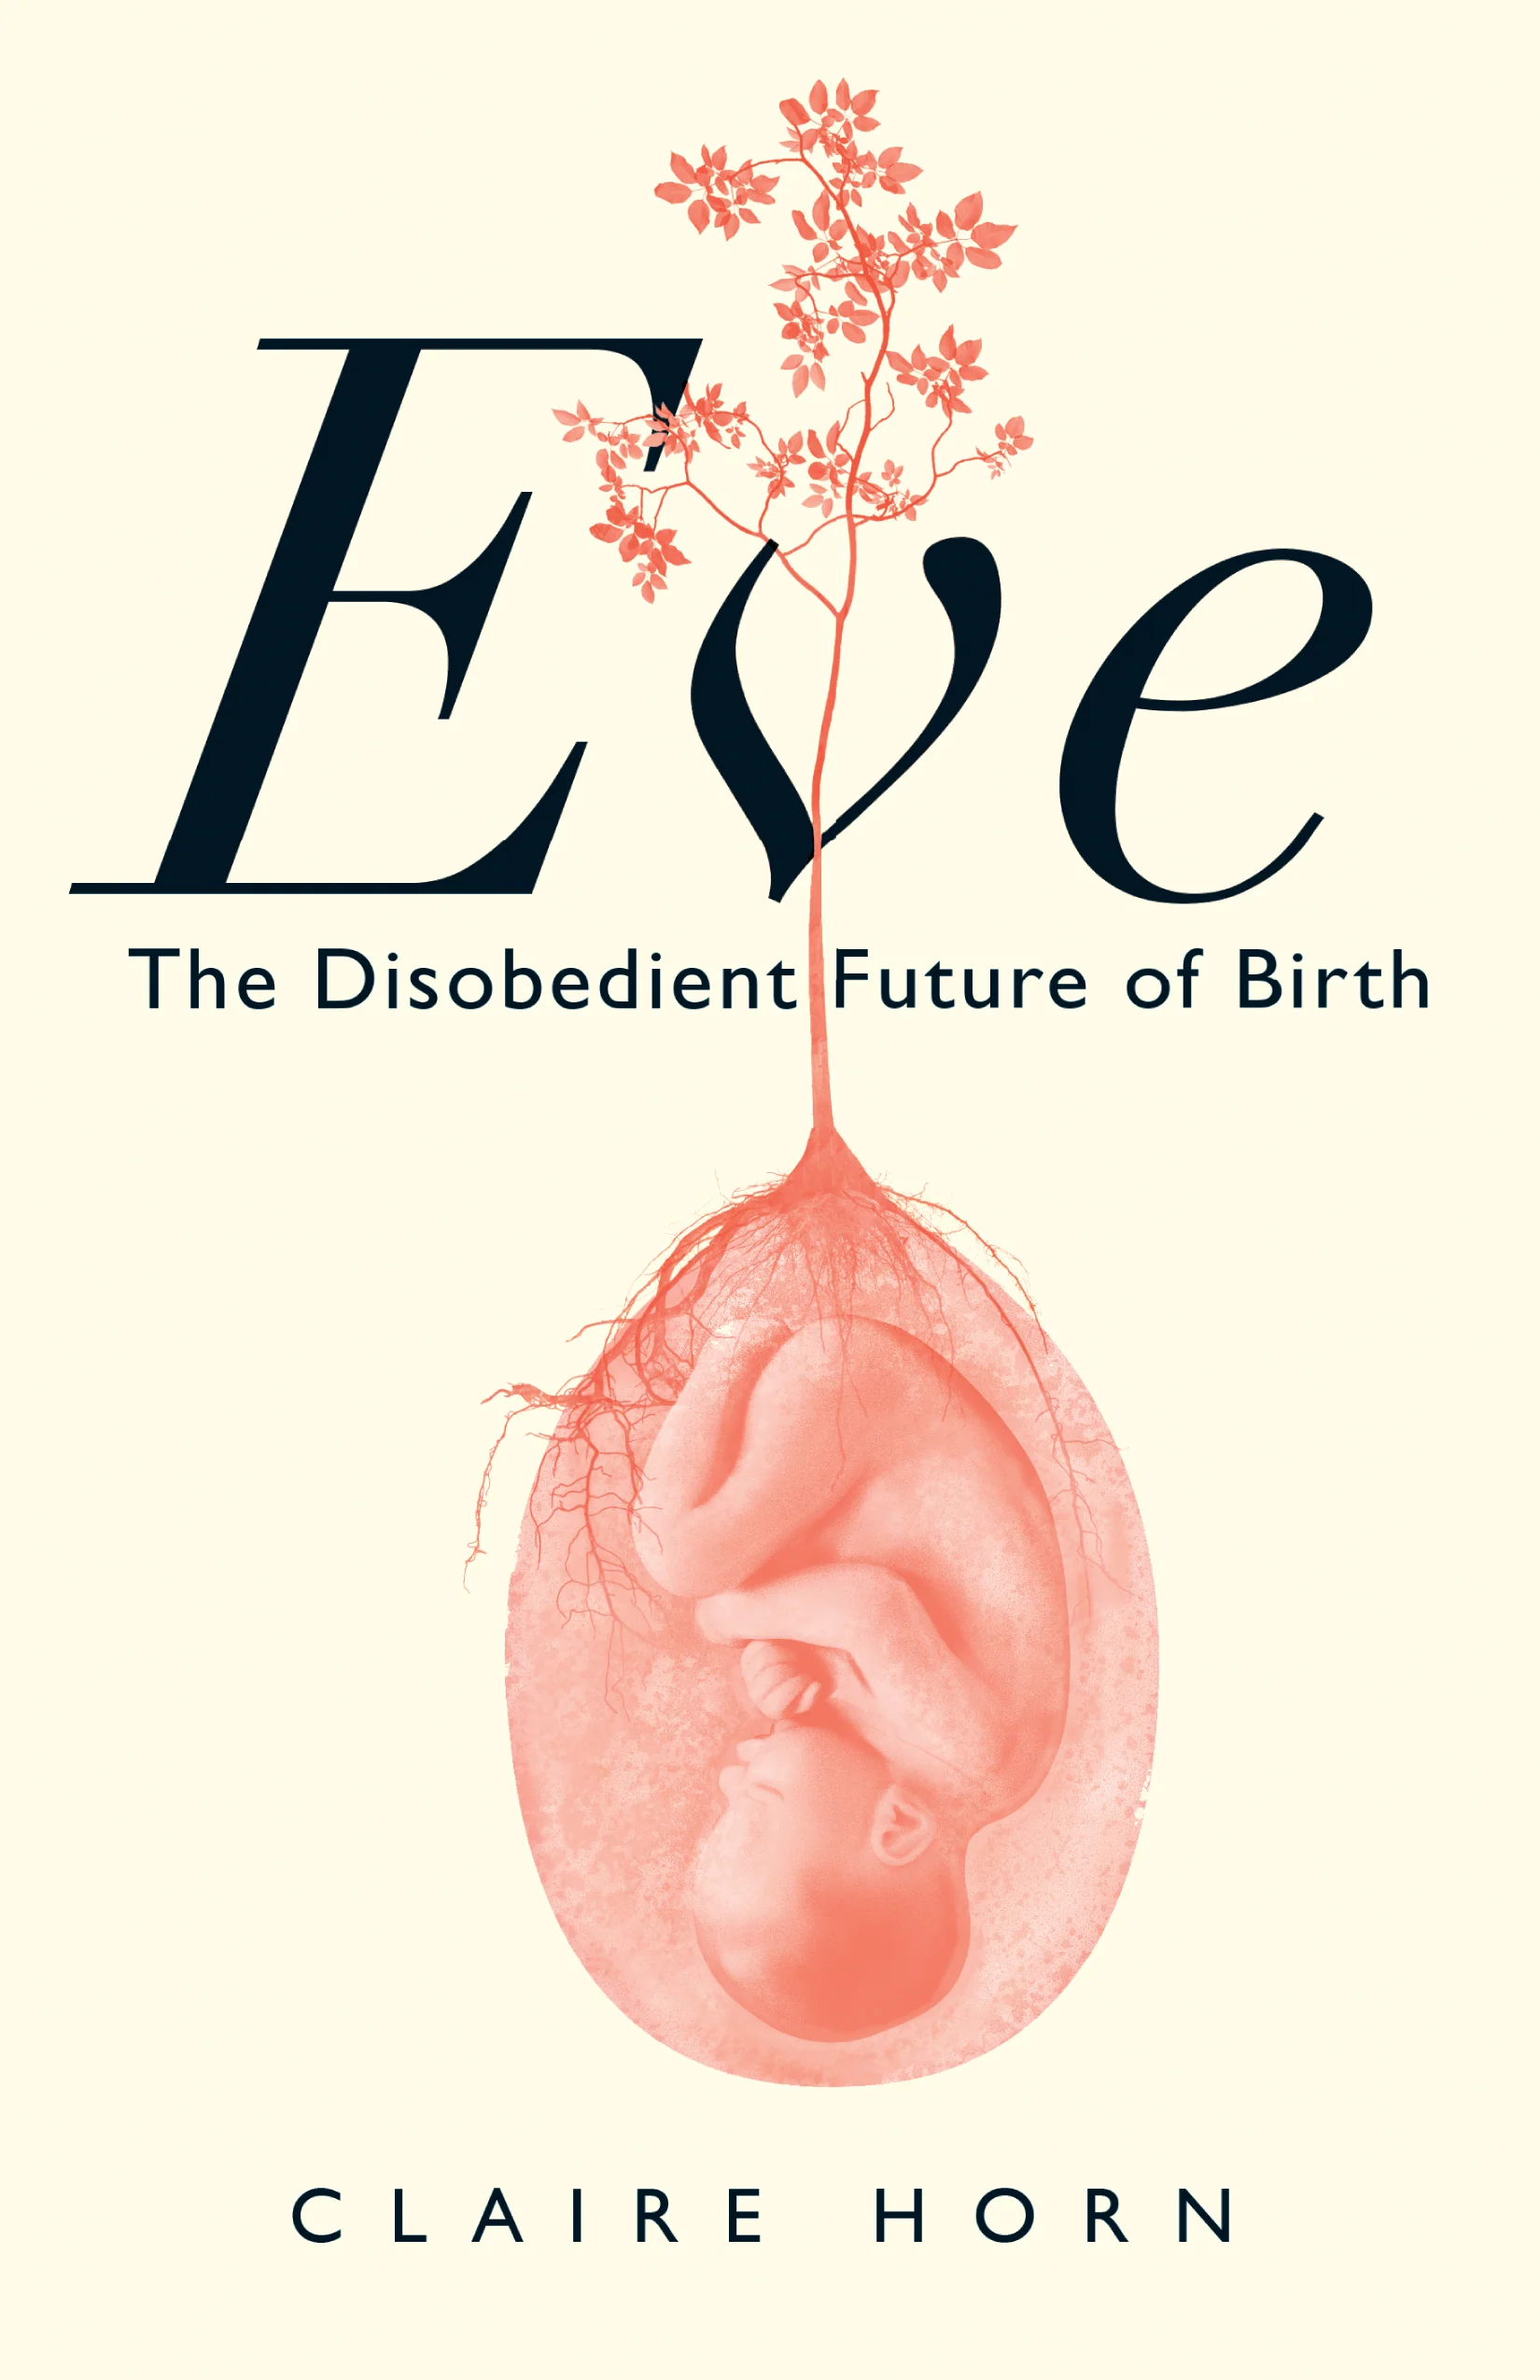 The cover of Eve: The Disobedient Future of Birth by Claire Horn